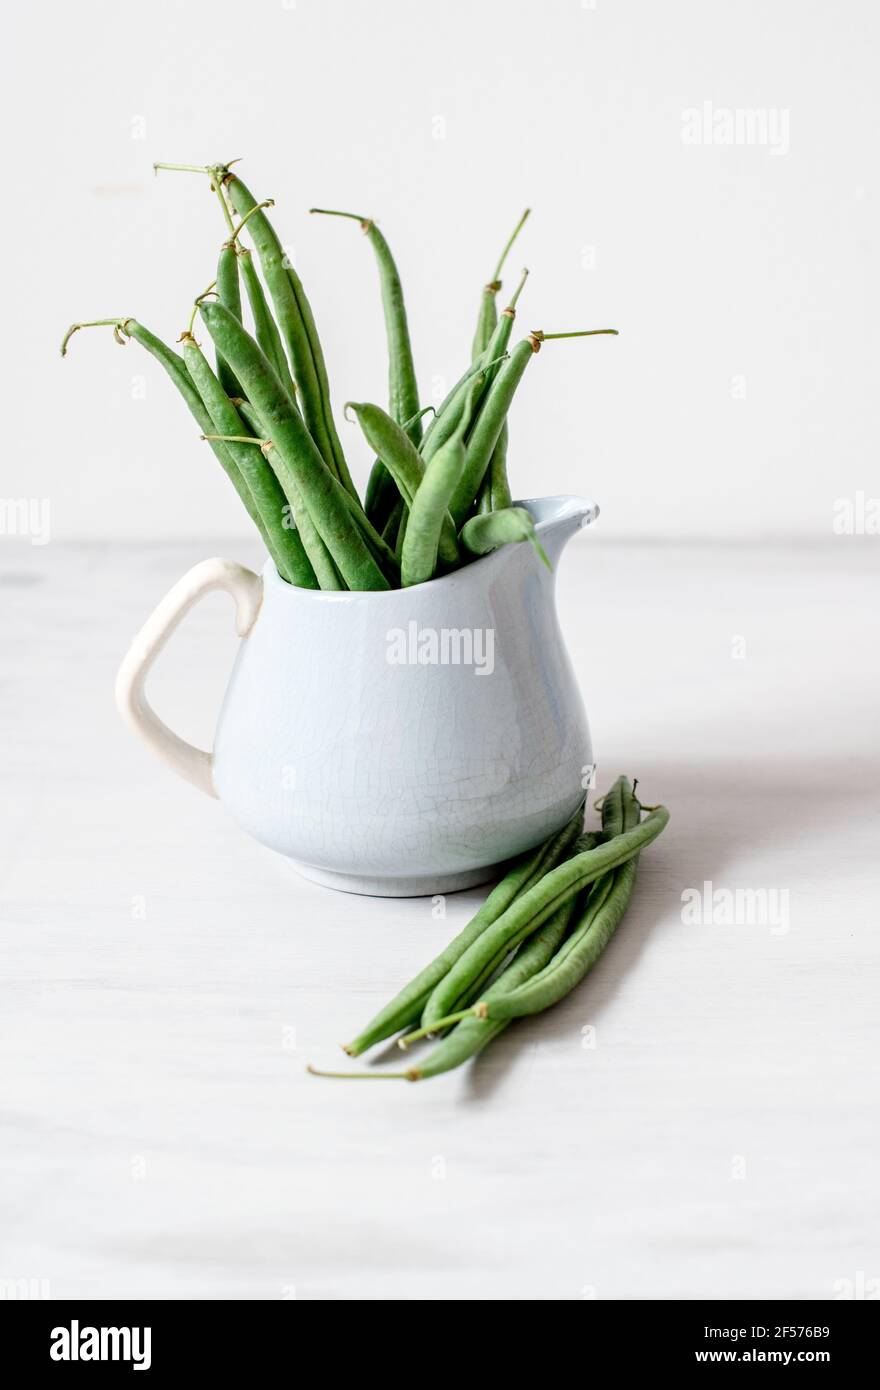 Organic French Beans against a simple plain background Stock Photo